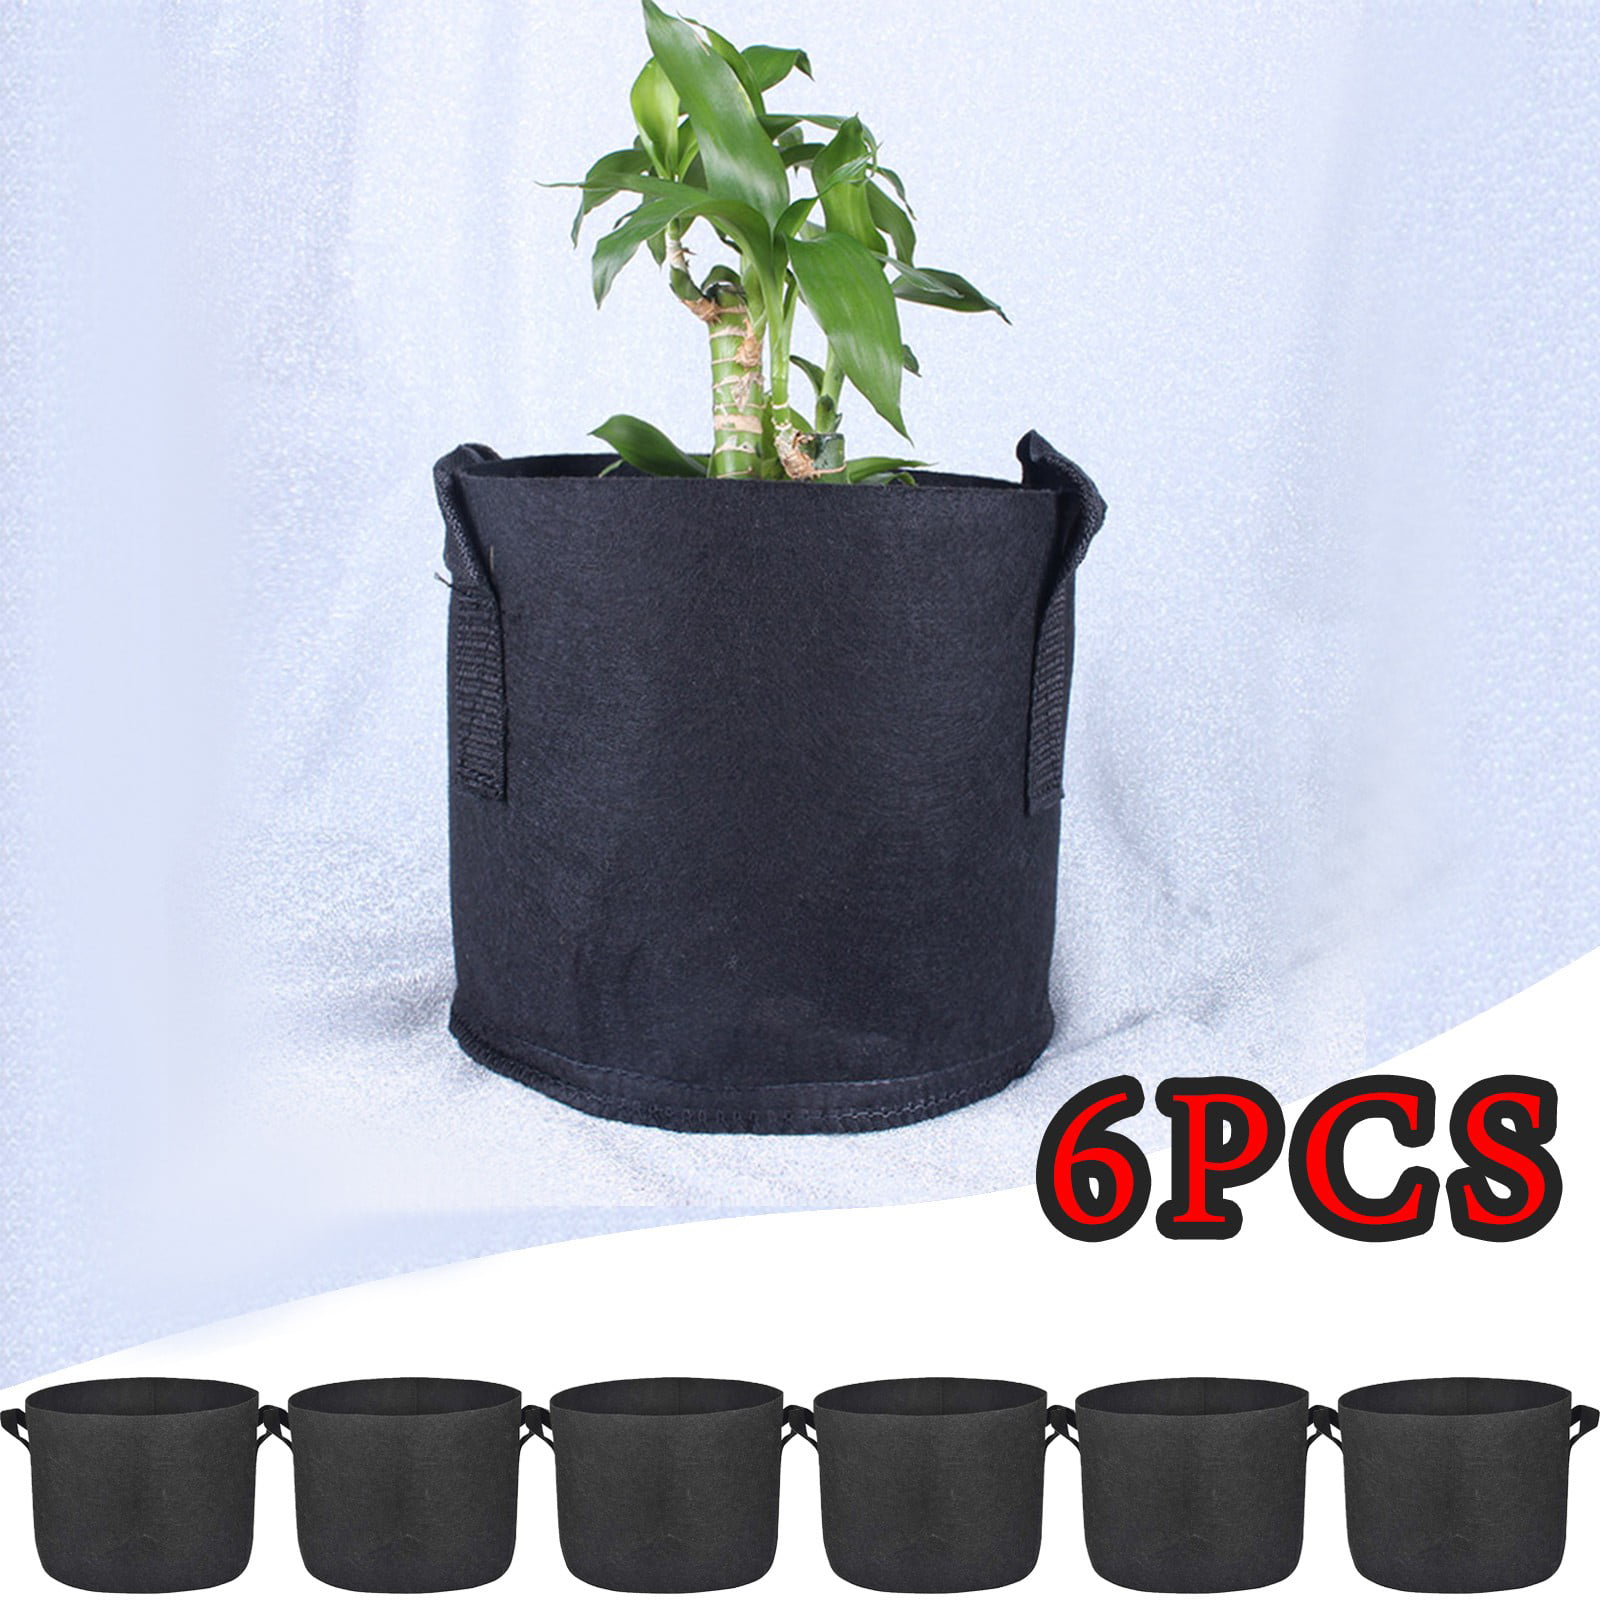 Round Fabric Pots Plant Pouch Root Container Grow Bag Aeration Pot Container 